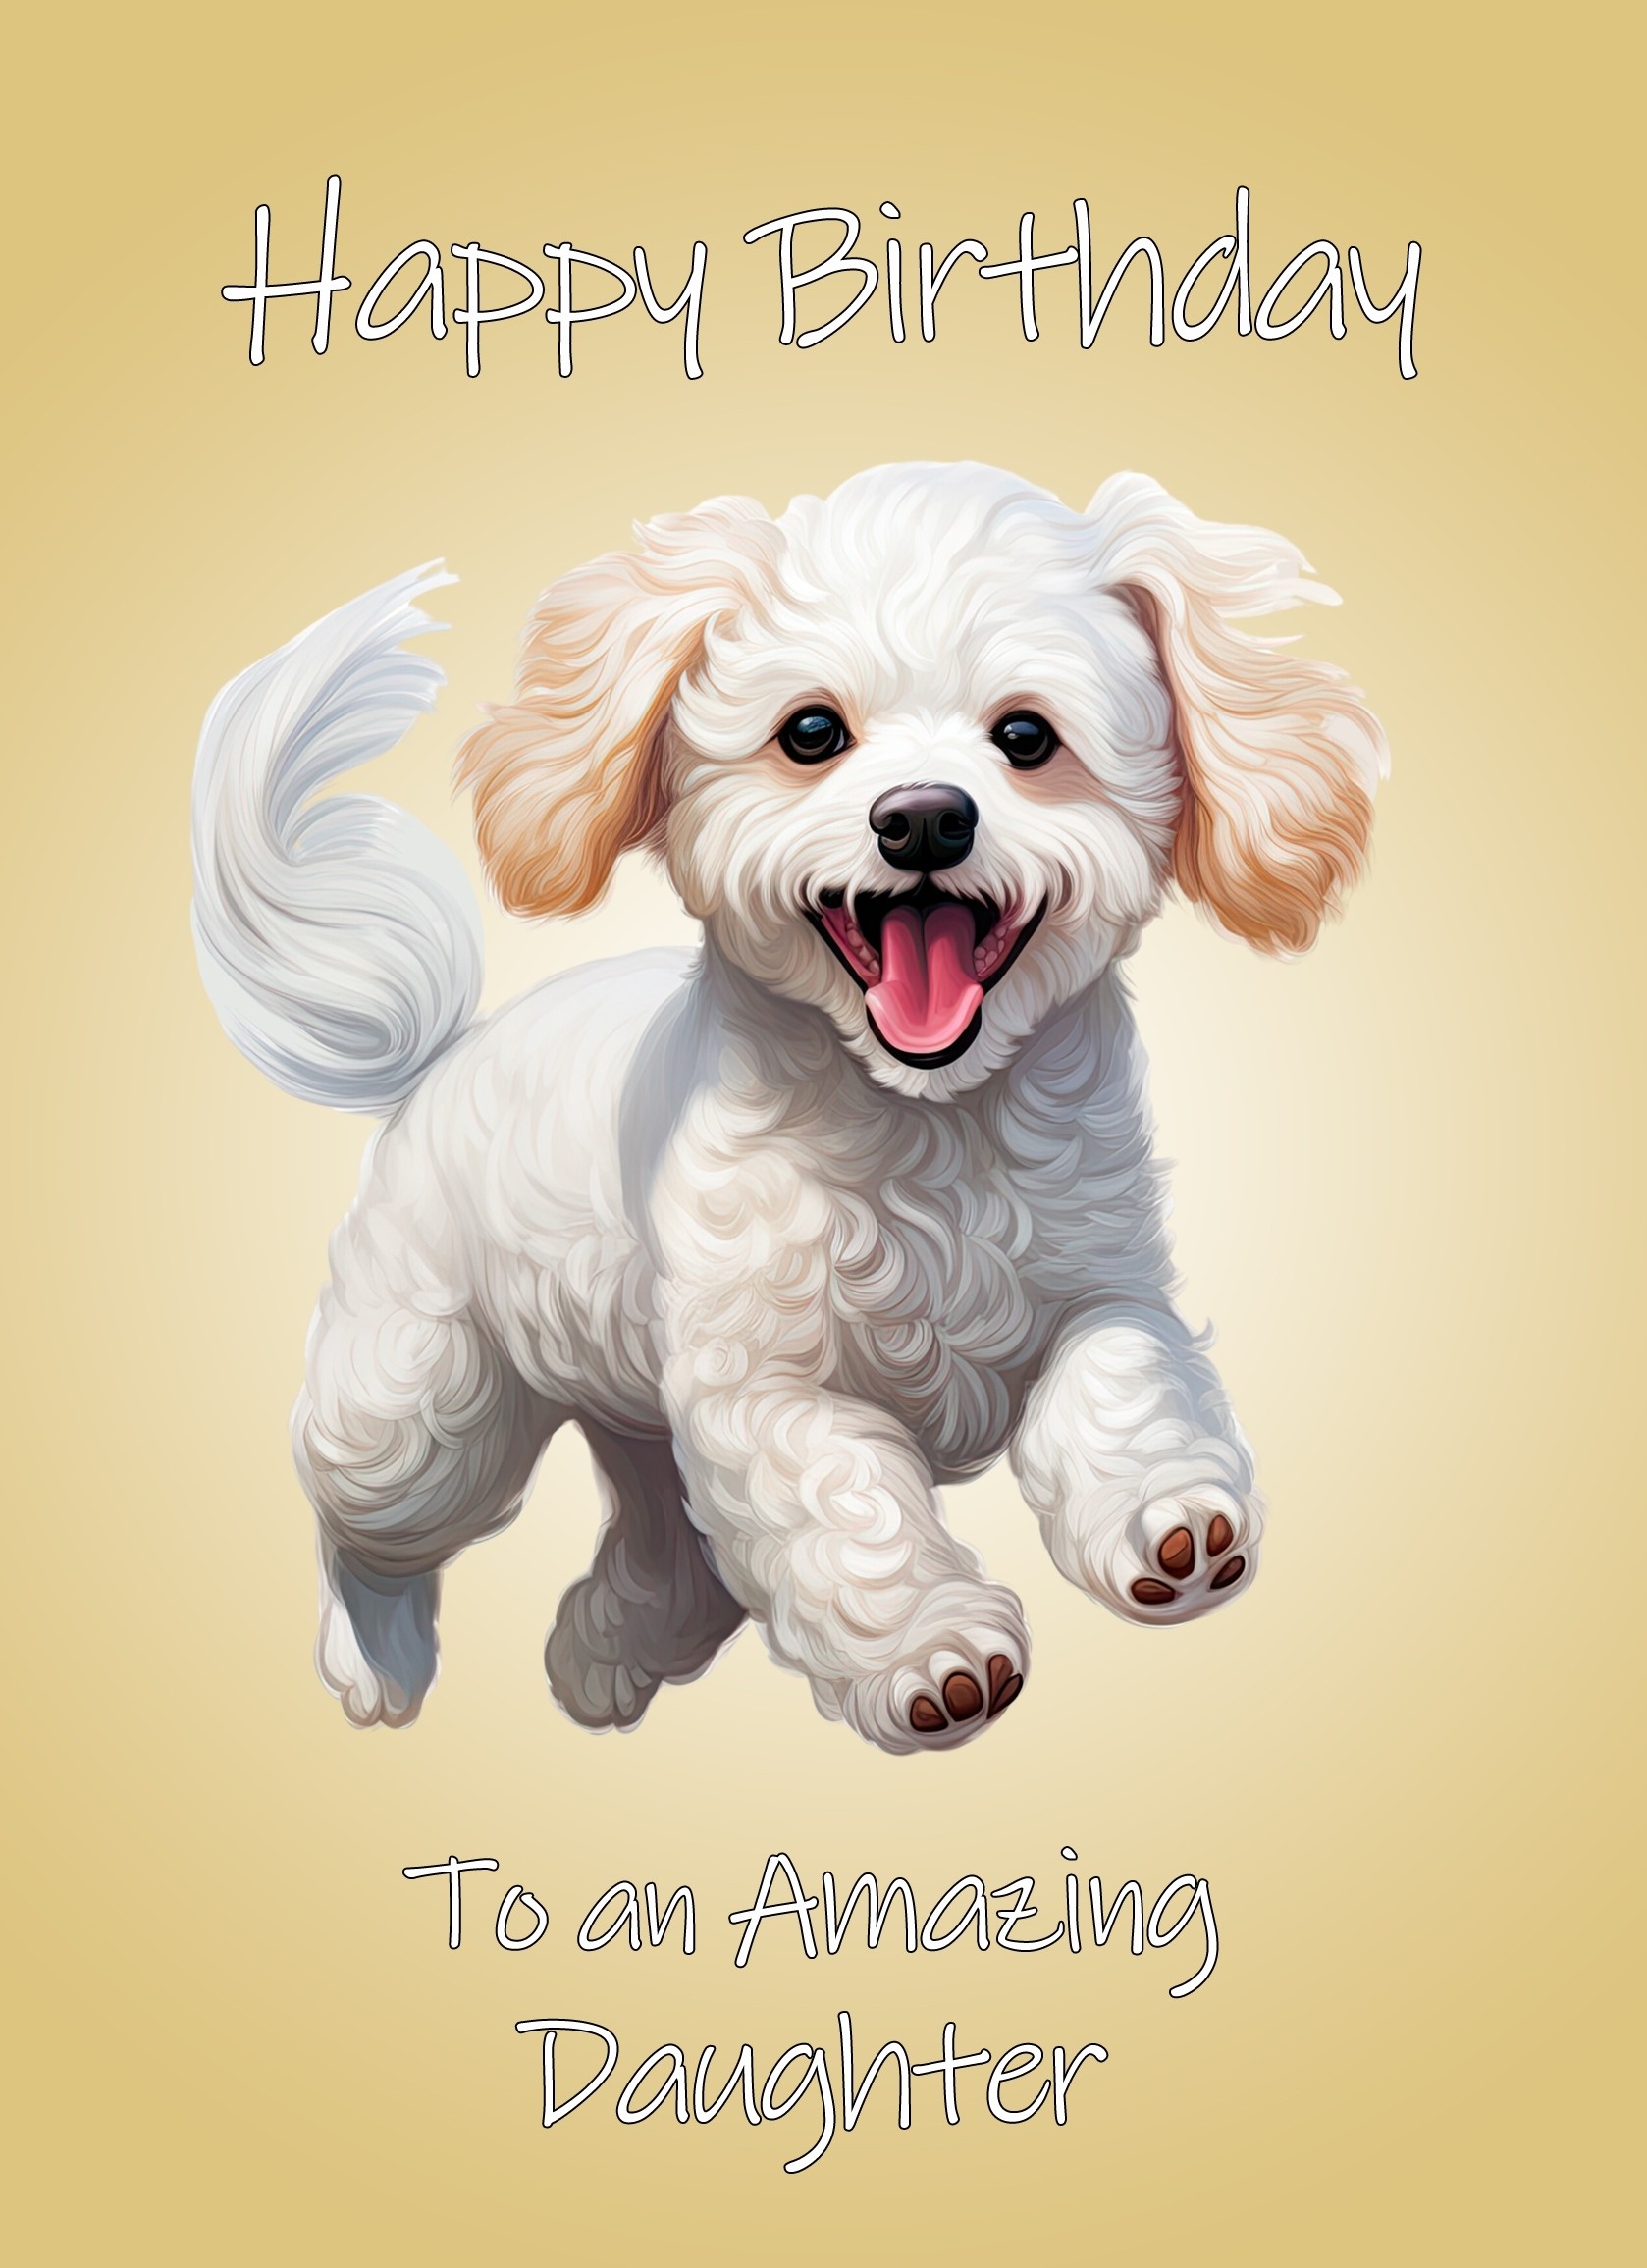 Poodle Dog Birthday Card For Daughter